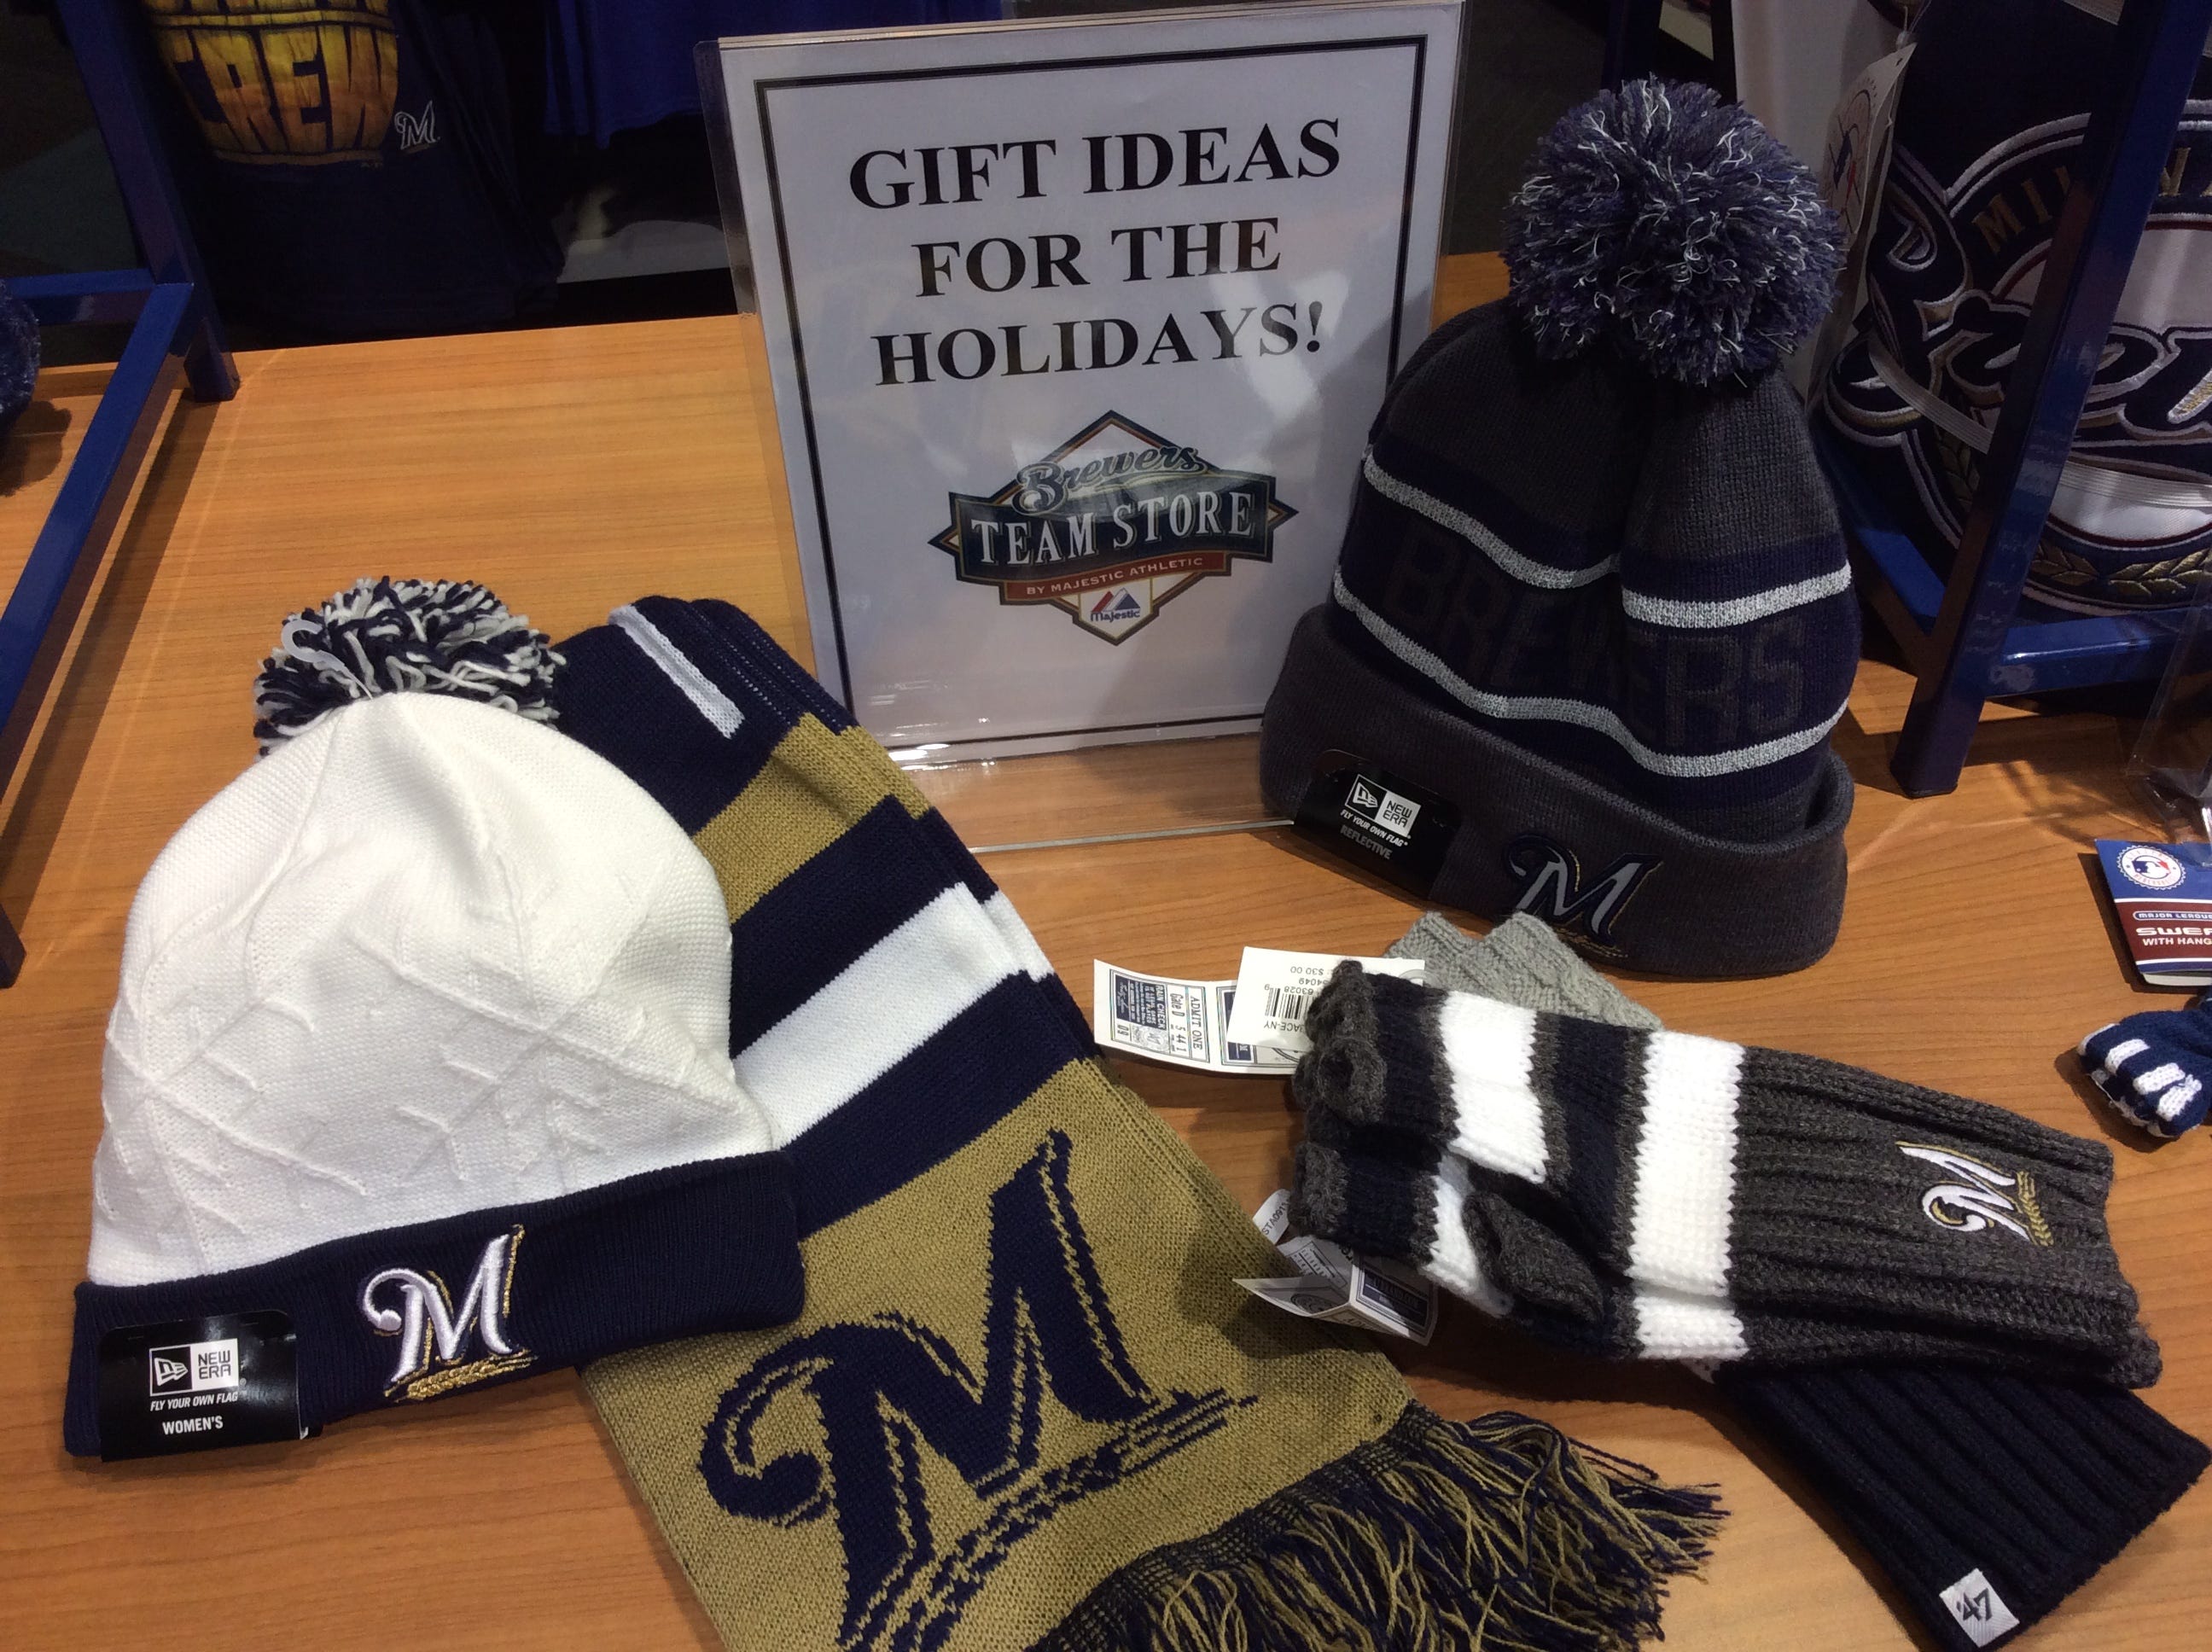 BREWERS TEAM STORE TO HOST ONE-DAY SALE, by Caitlin Moyer